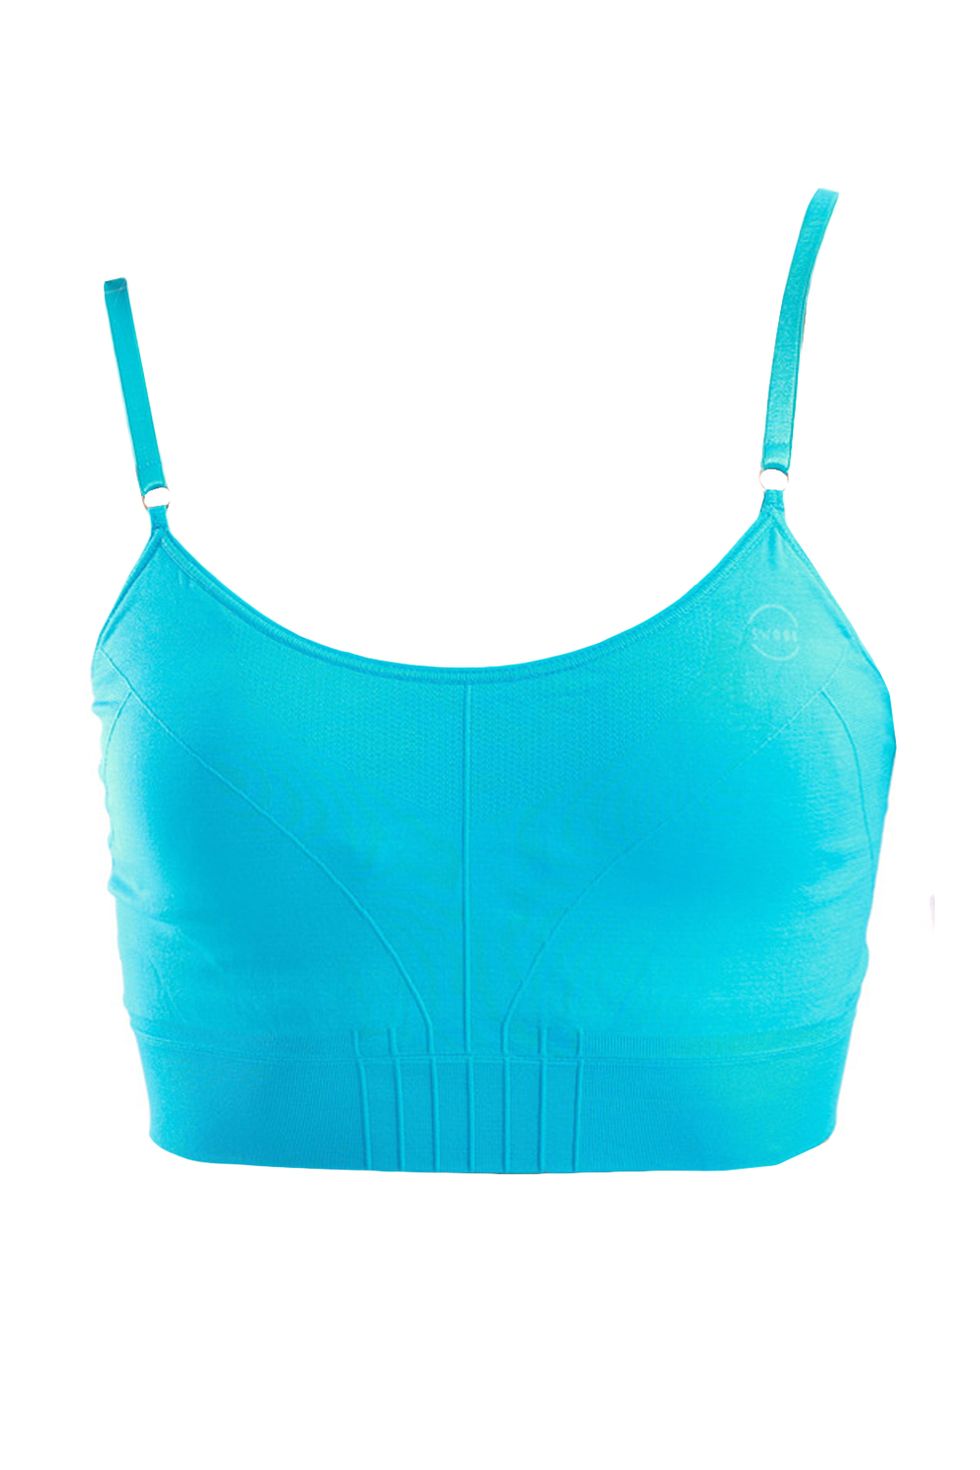 6 Sports Bras with Pockets for Your iPhone - 6 Sports Bras That Have ...